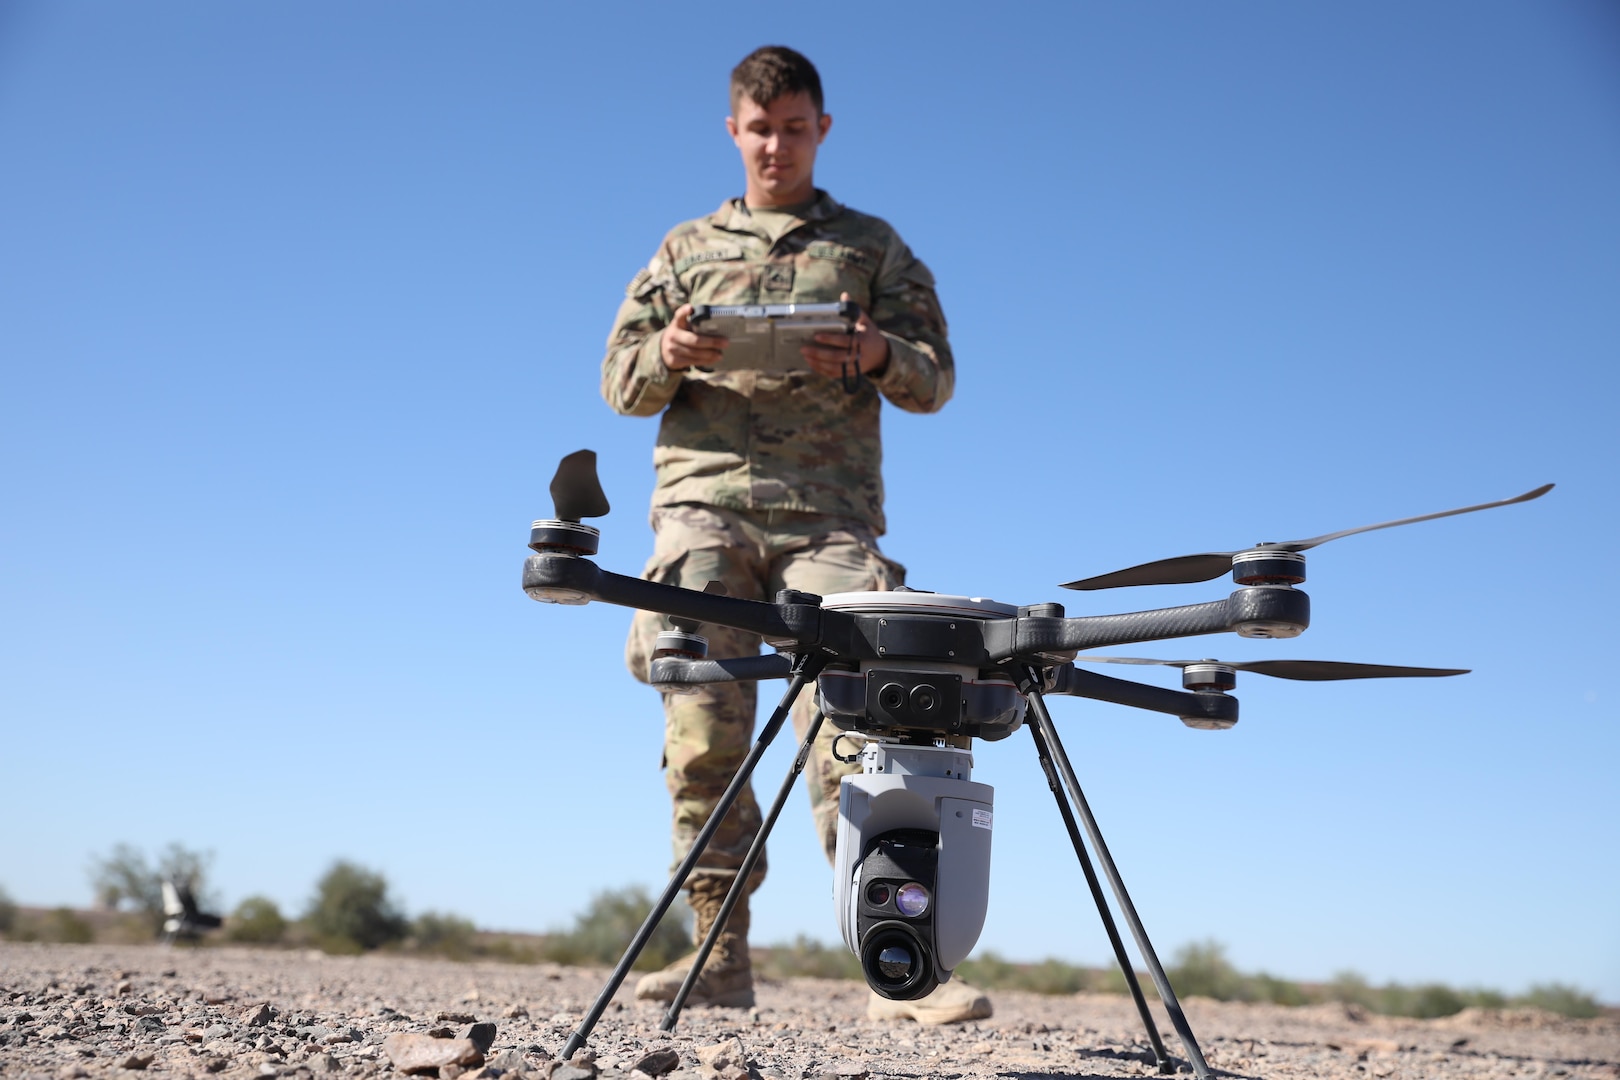 A soldier operates a military drone.